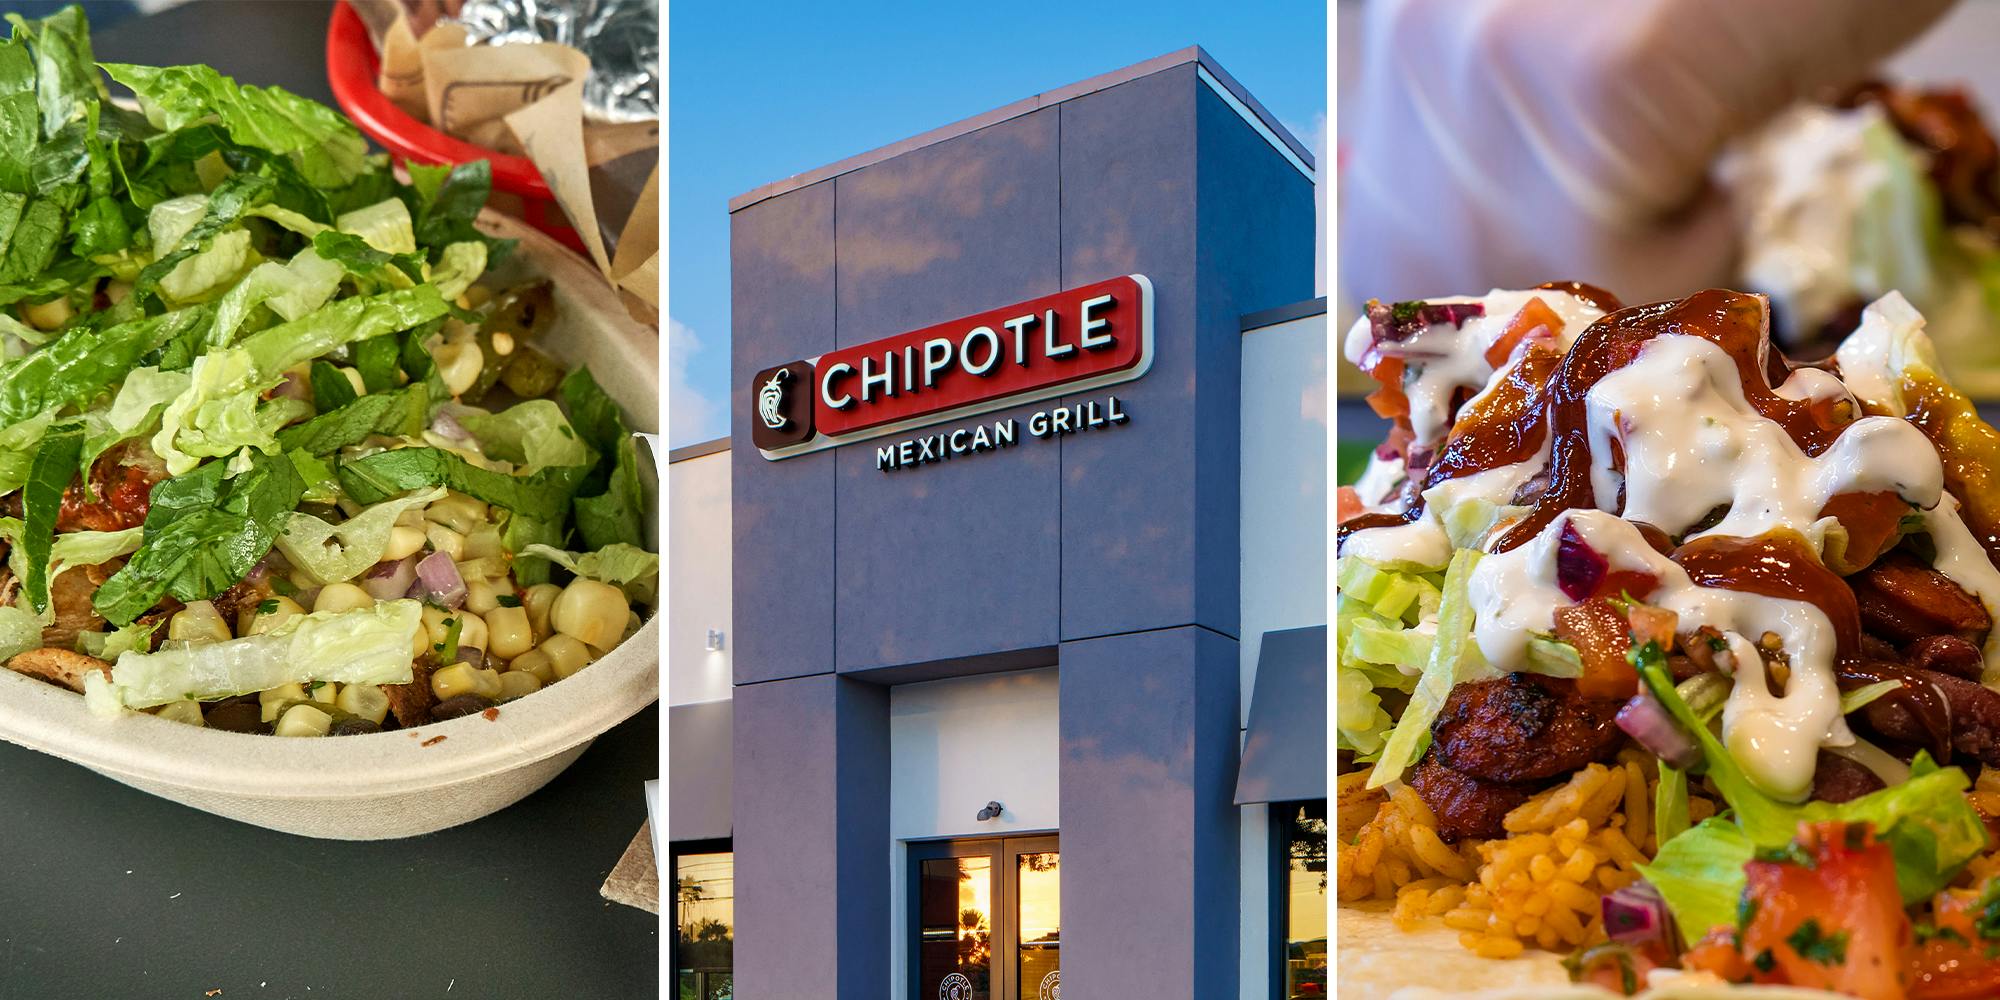 Woman says Chipotle worker refused to remake her bowl after putting meat in it